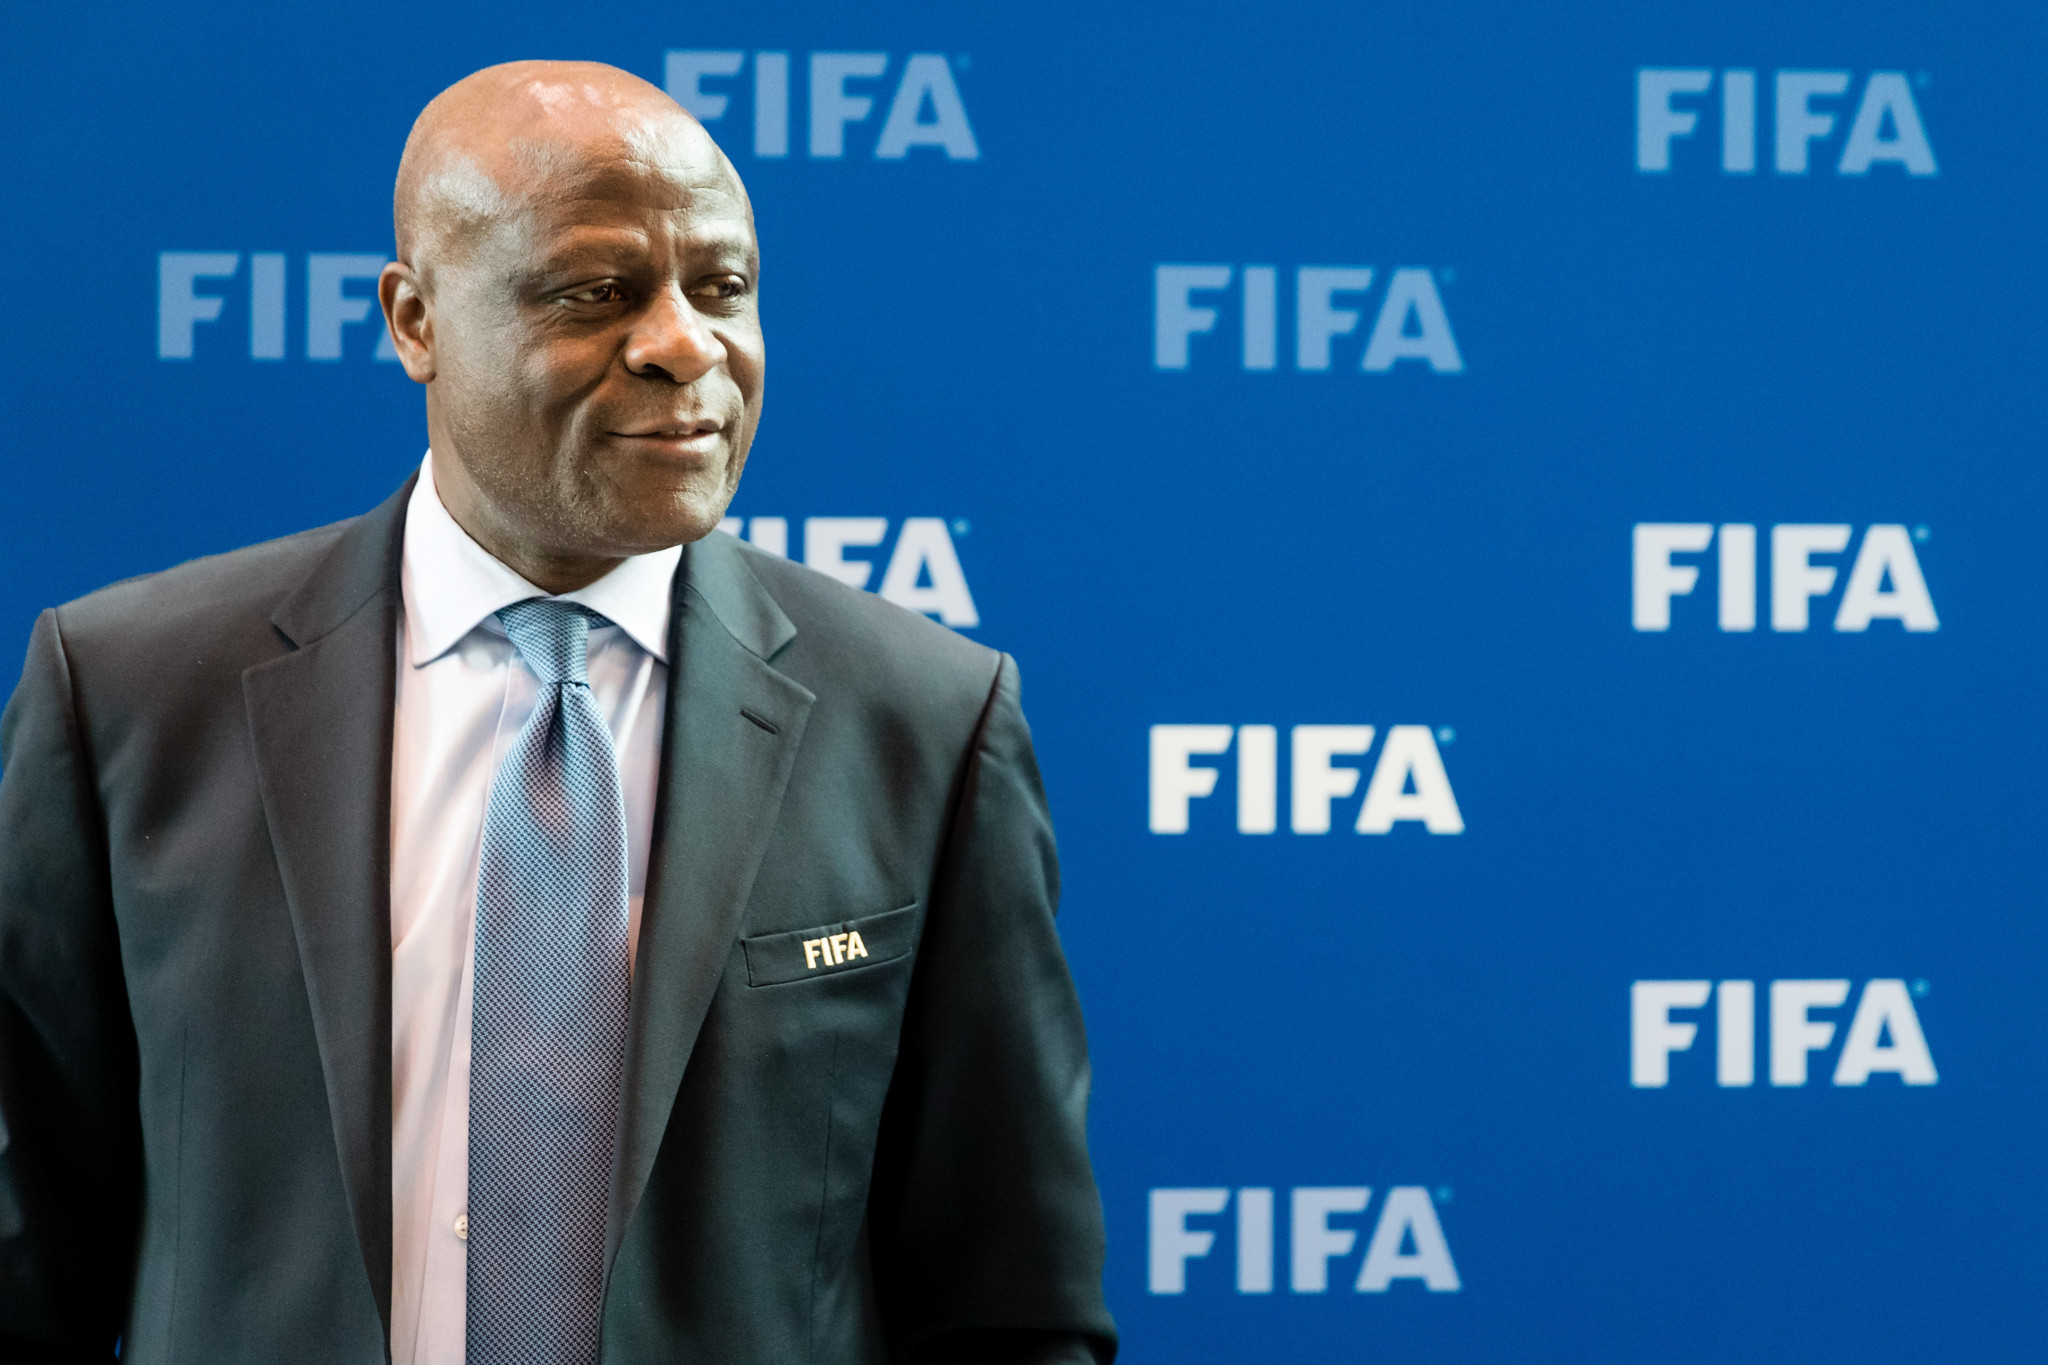 FIFA Council member Omari arrested on corruption charges in DR Congo